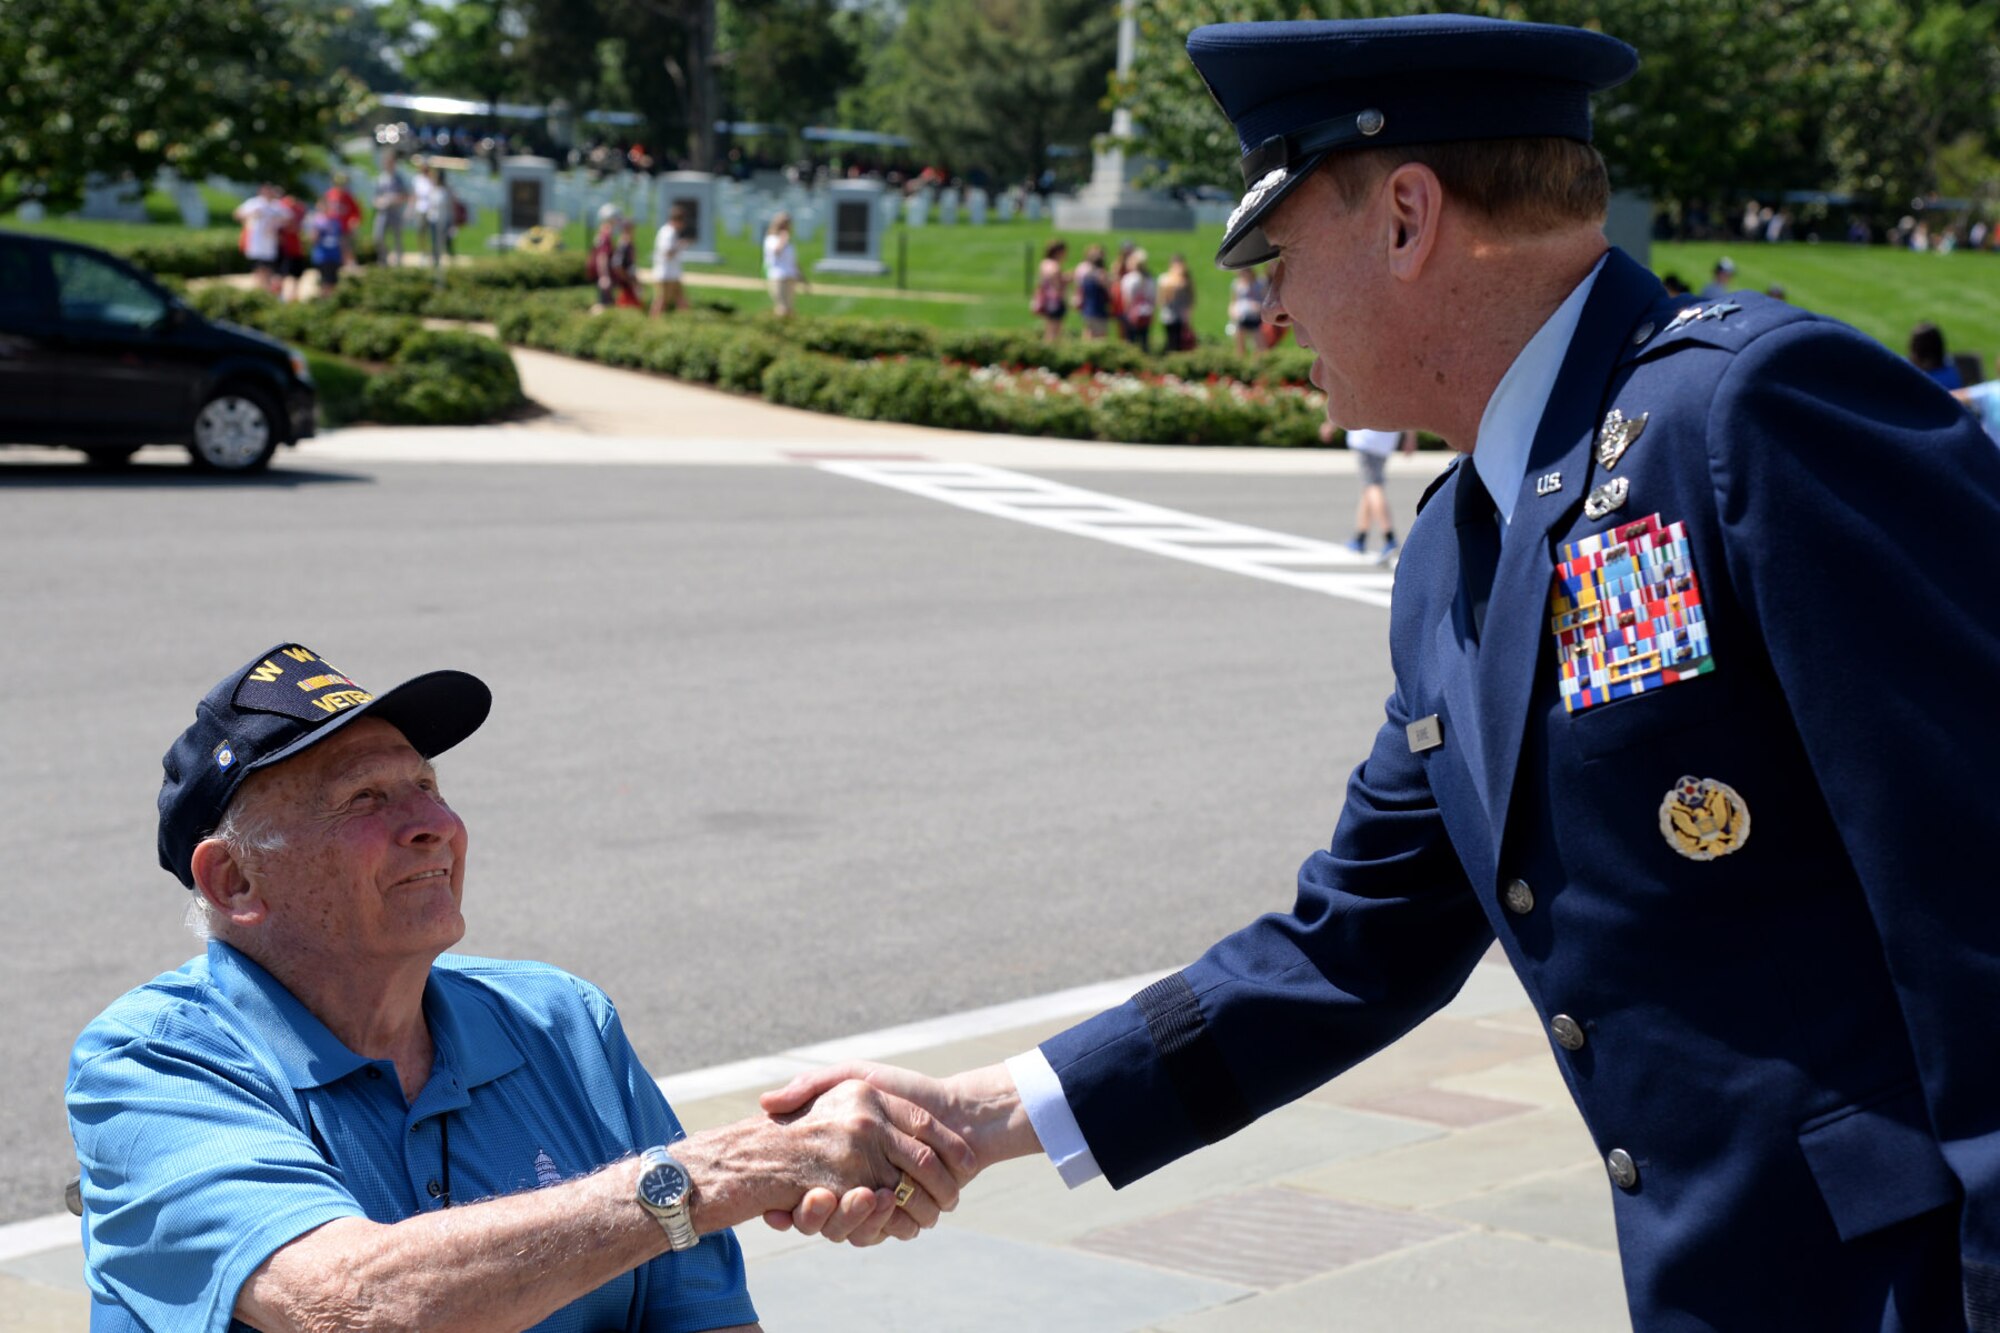 Air Force District of Washington Commander Maj. Gen. Darryl Burke greets
Vets Roll honoree and Navy Veteran Dick Miller while visiting the Tomb of
the Unknown Soldier for a wreath laying ceremony at Arlington National
Cemetery on May 24, 2016. The Vets Roll Project pays tribute to WW2 and
Korean War Veterans by taking them on a four day trip to Washington D.C. The
Air Force District of Washington brings air, space and cyberspace
capabilities to the joint team protecting the nation's capital, and supports
local personnel and those serving worldwide. (U.S. Air Force photo/Tech.
Sgt. Matt Davis)
